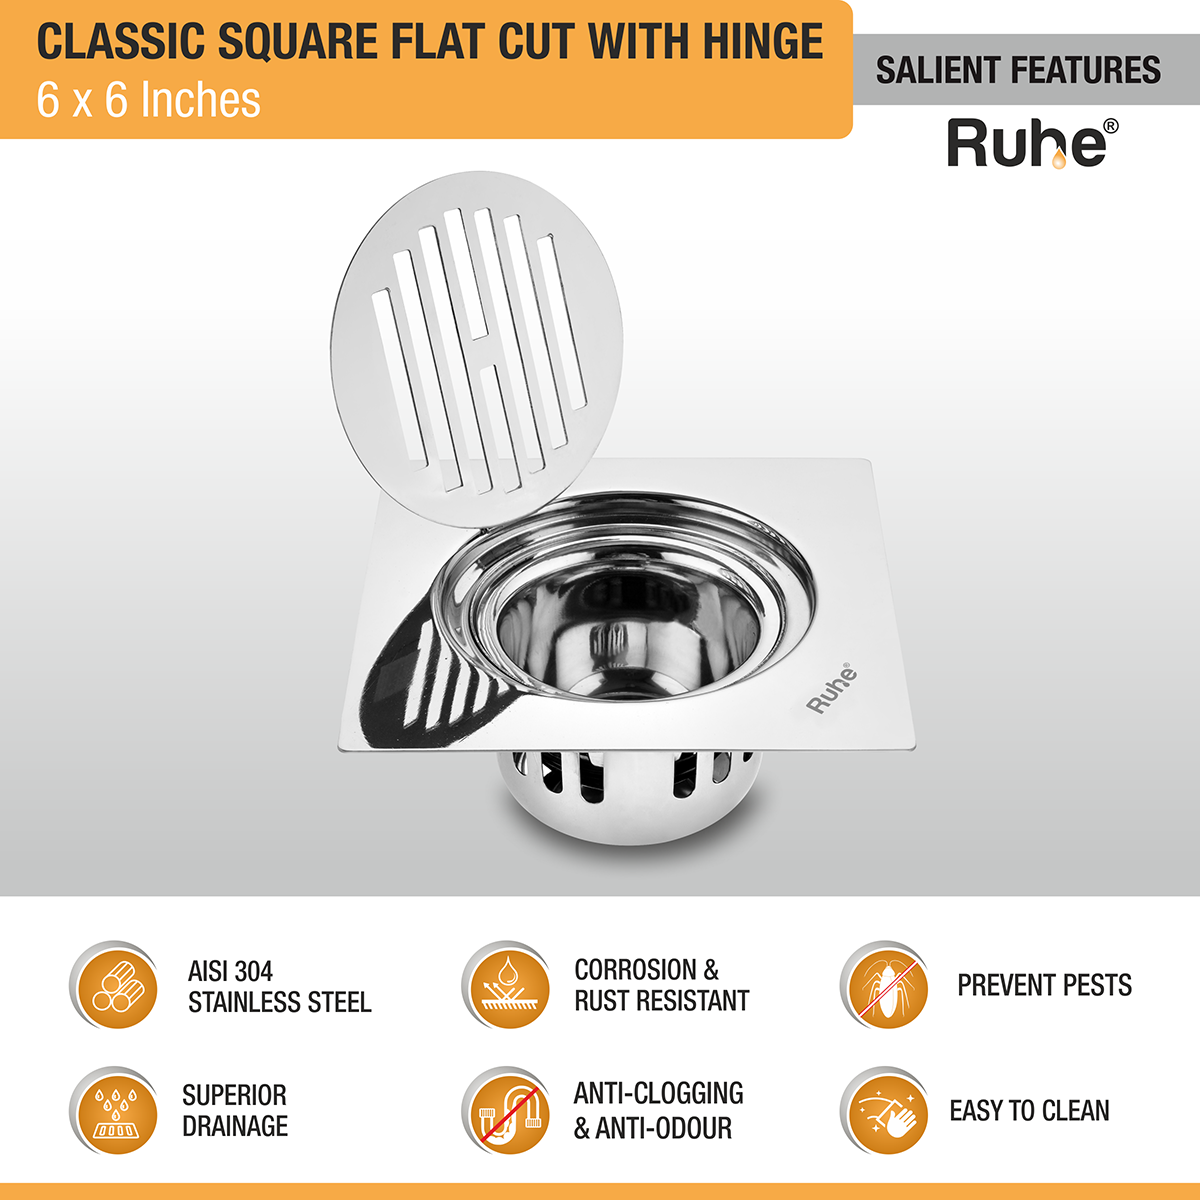 Classic Square Flat Cut Floor Drain (6 x 6 Inches) with Hinge & Cockroach Trap (304 Grade) features